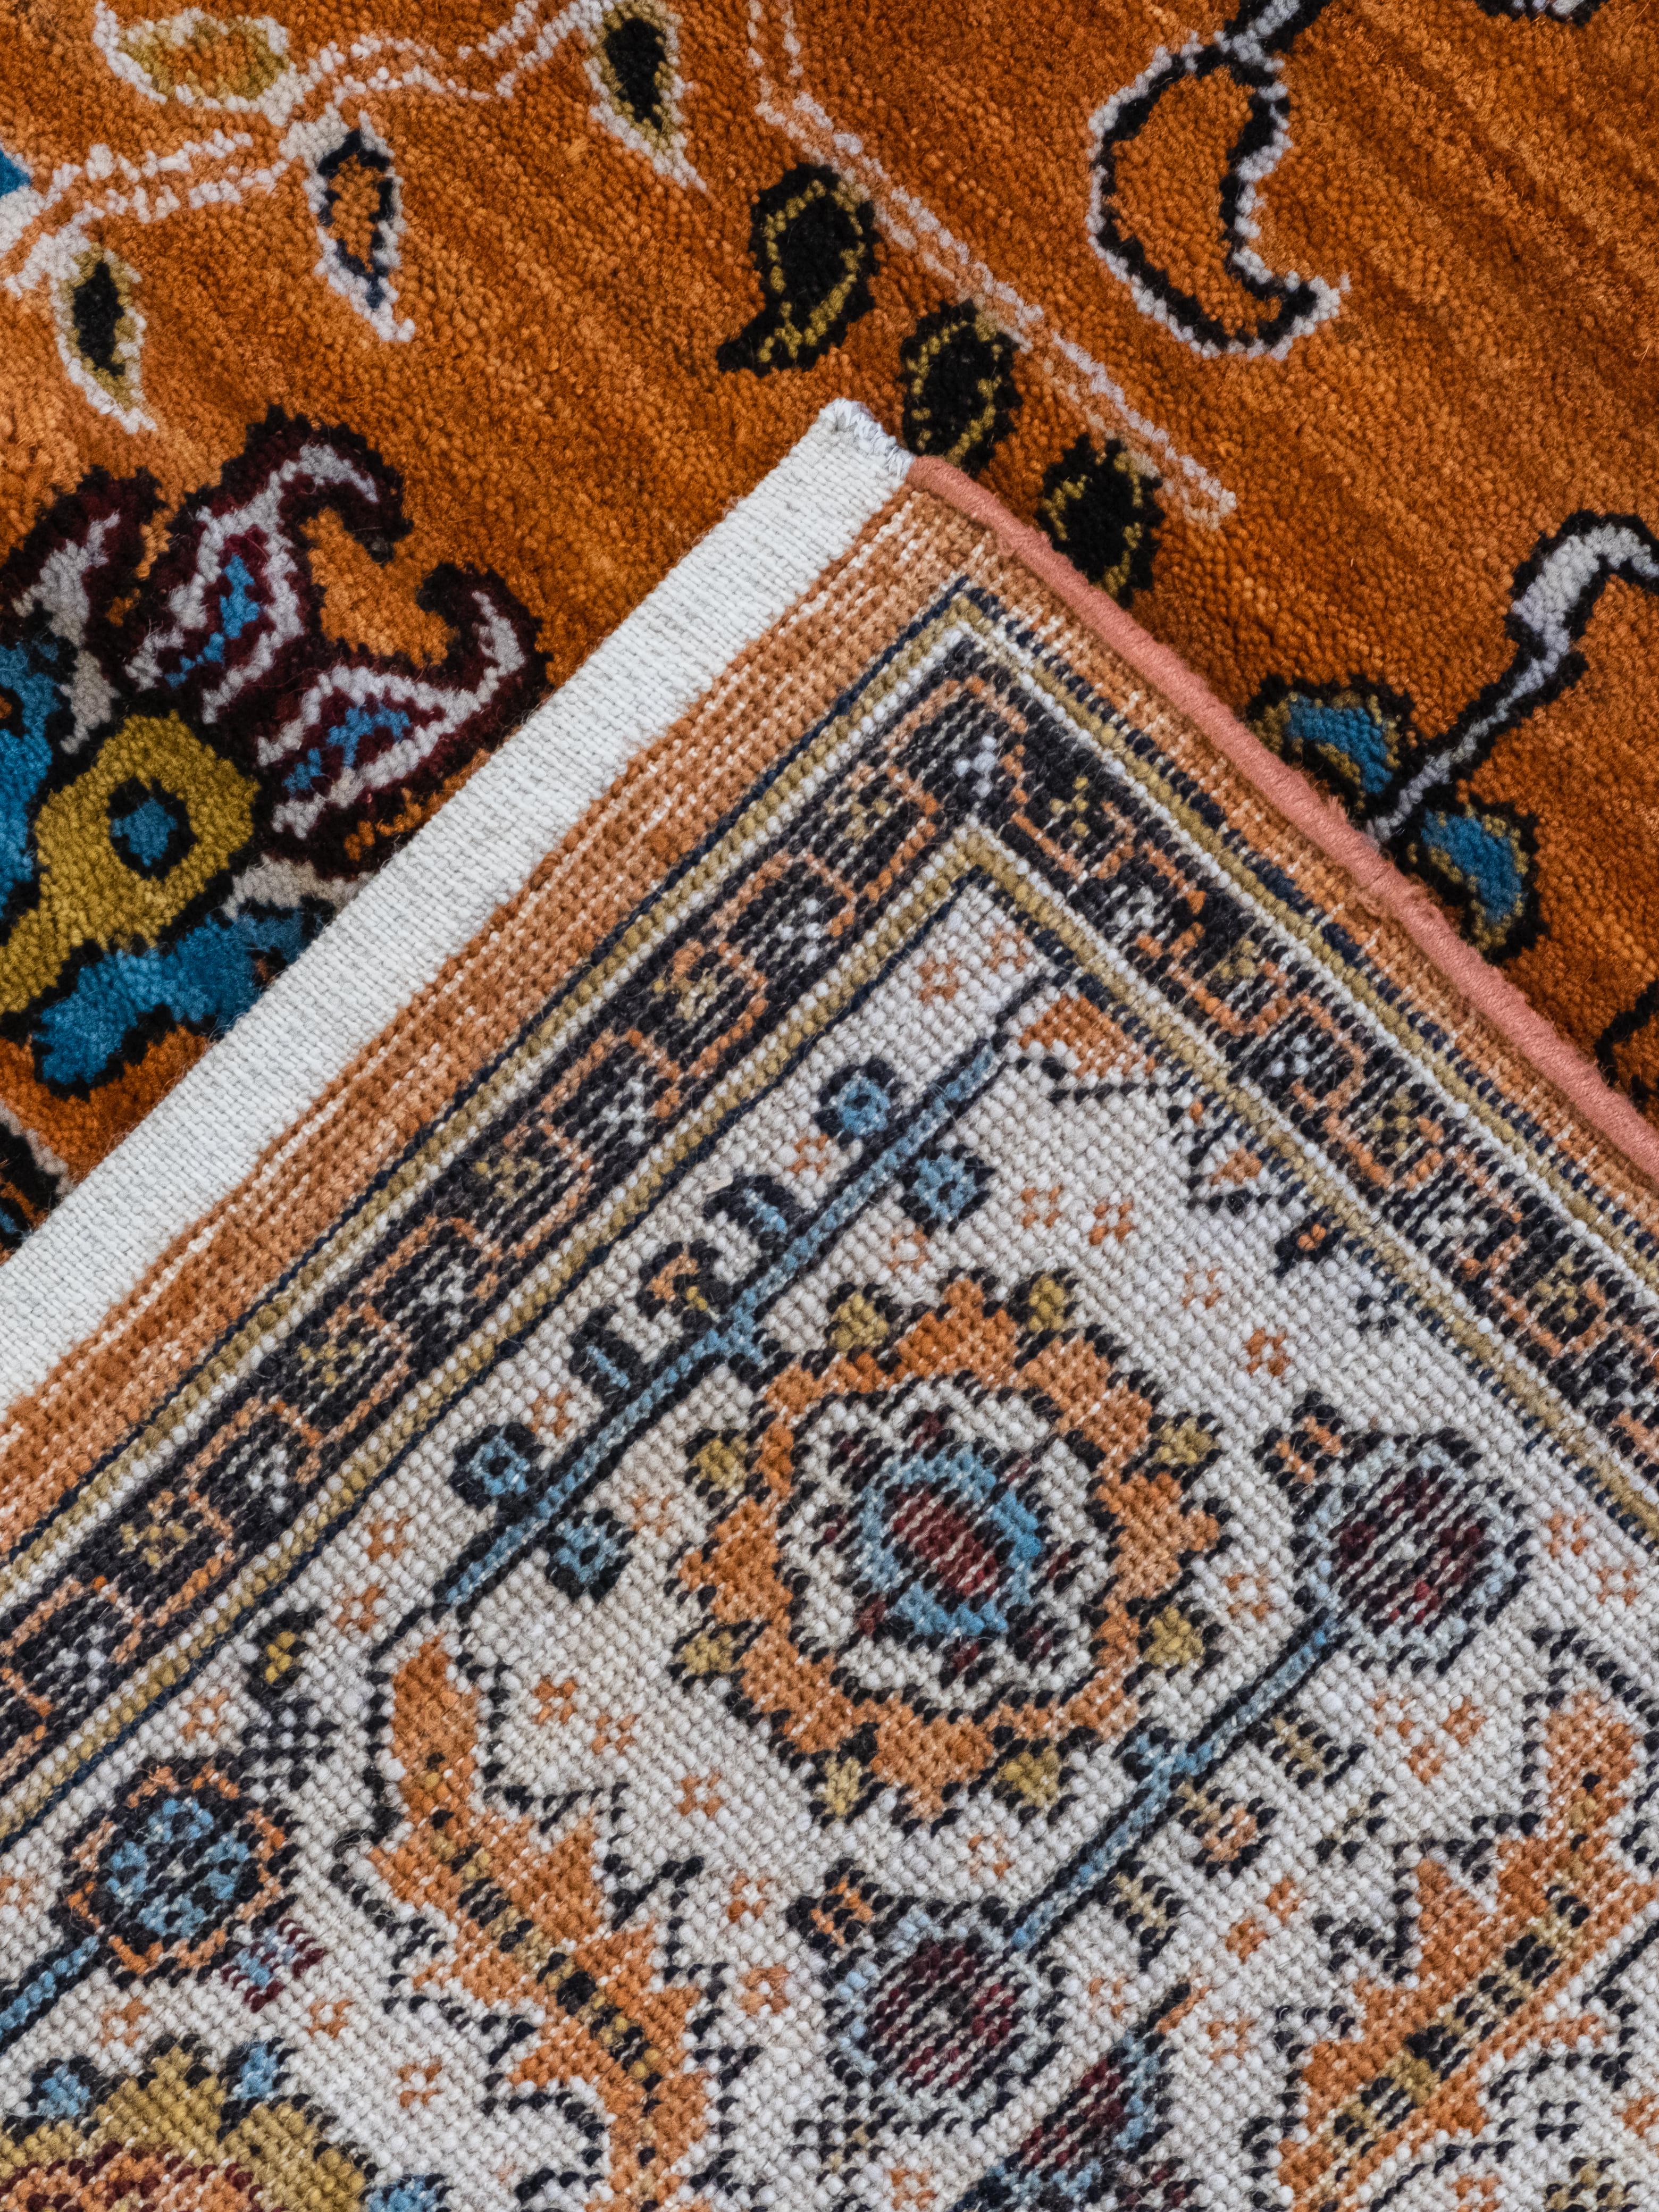 Transitional Orange, Blue, and Cream Persian Area Rug in Pure Wool, 5' x 7' For Sale 3